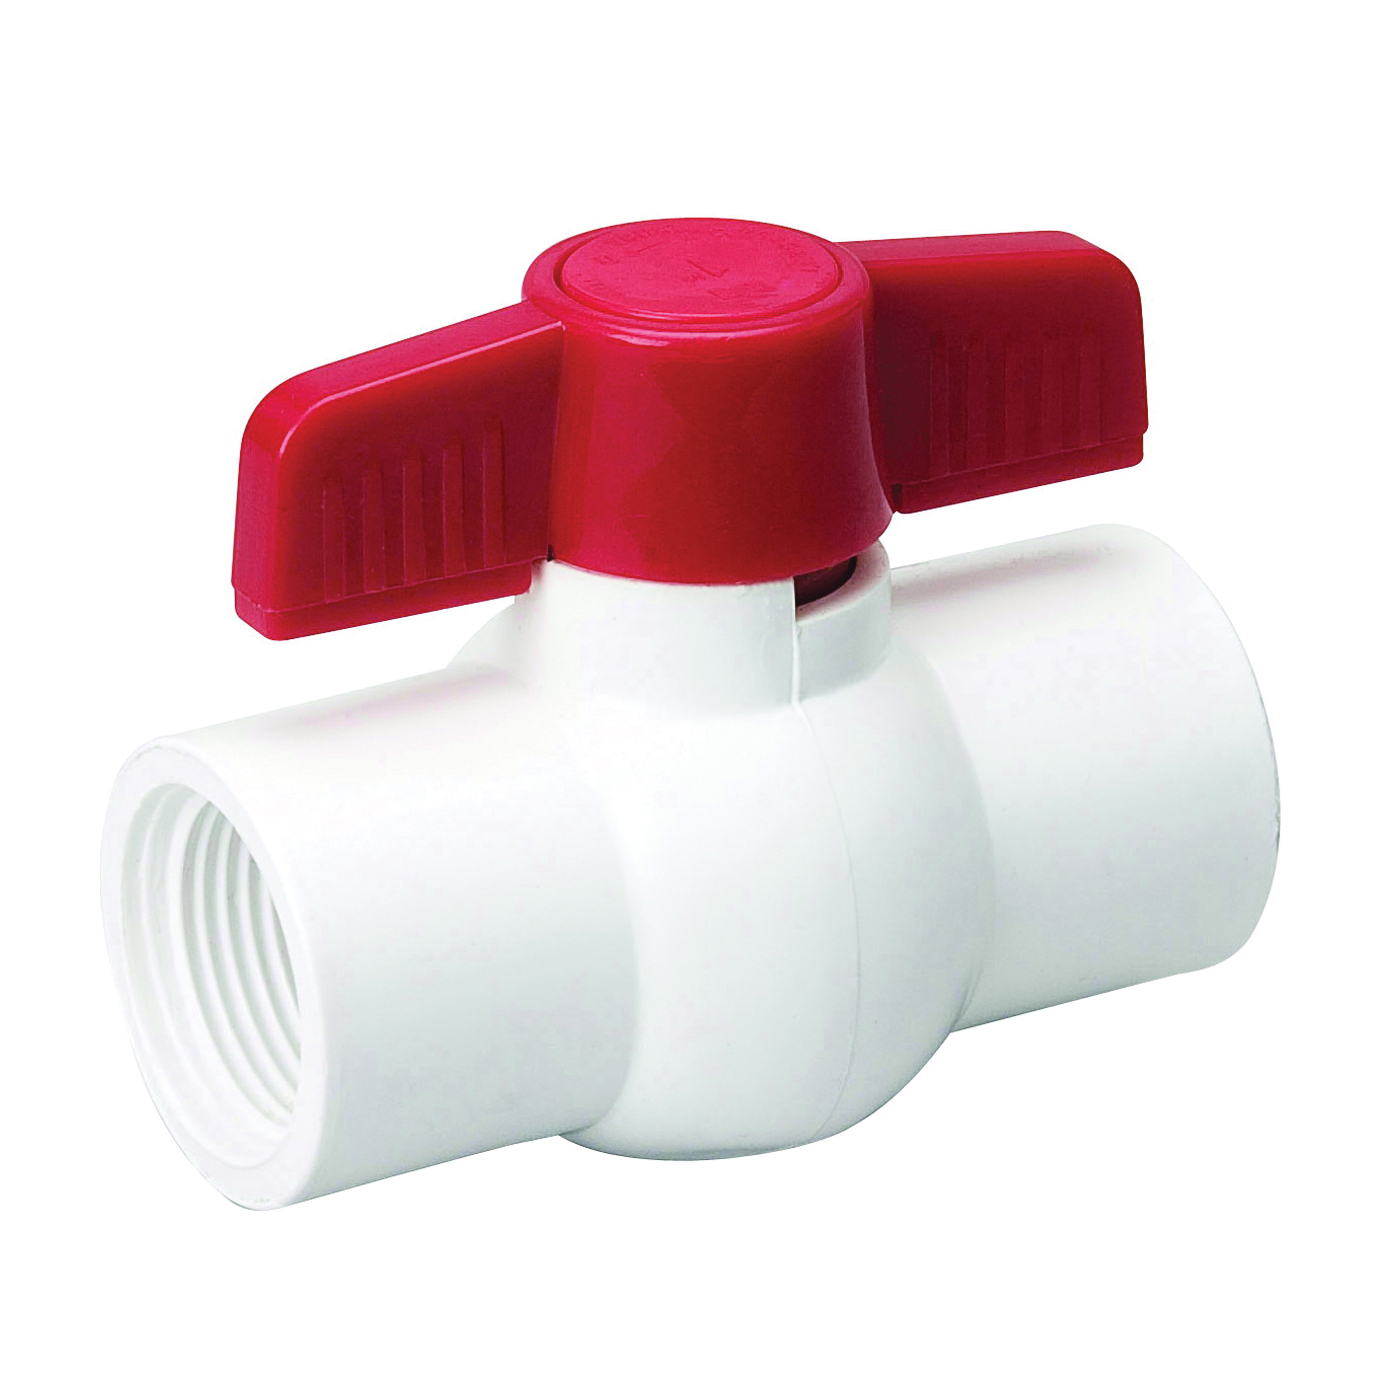 107-138HC Ball Valve, 2 in Connection, FPT x FPT, 150 psi Pressure, PVC Body